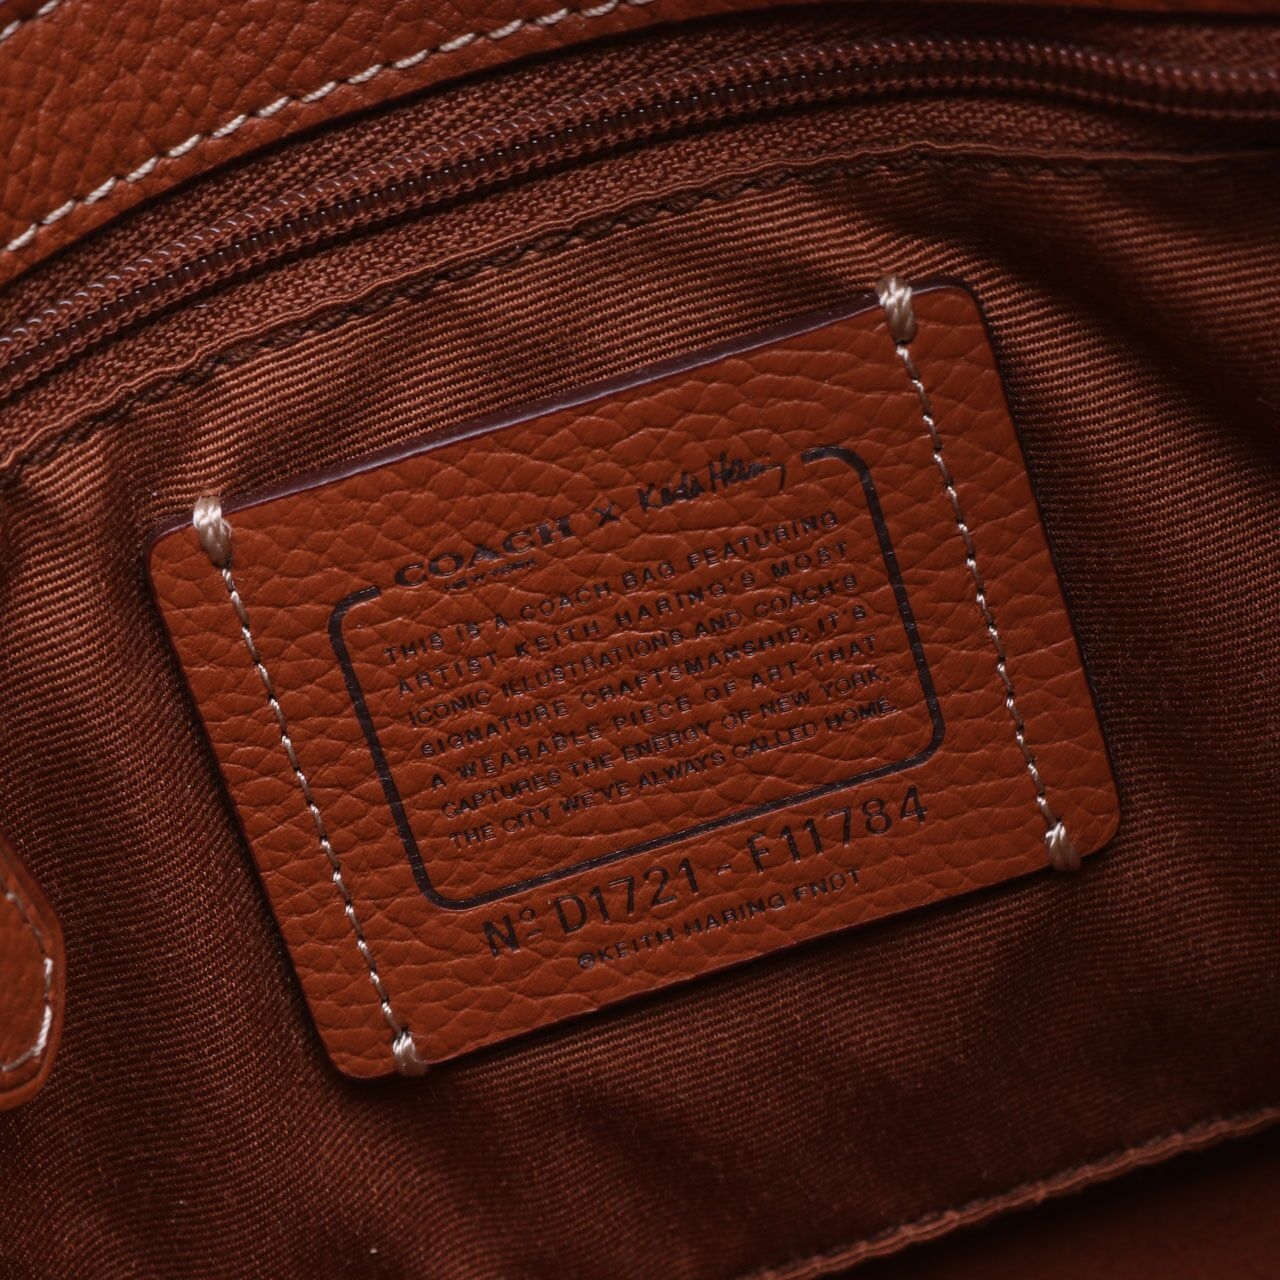 Coach Keith Haring Hudson Brown Leather Crossbody Bag